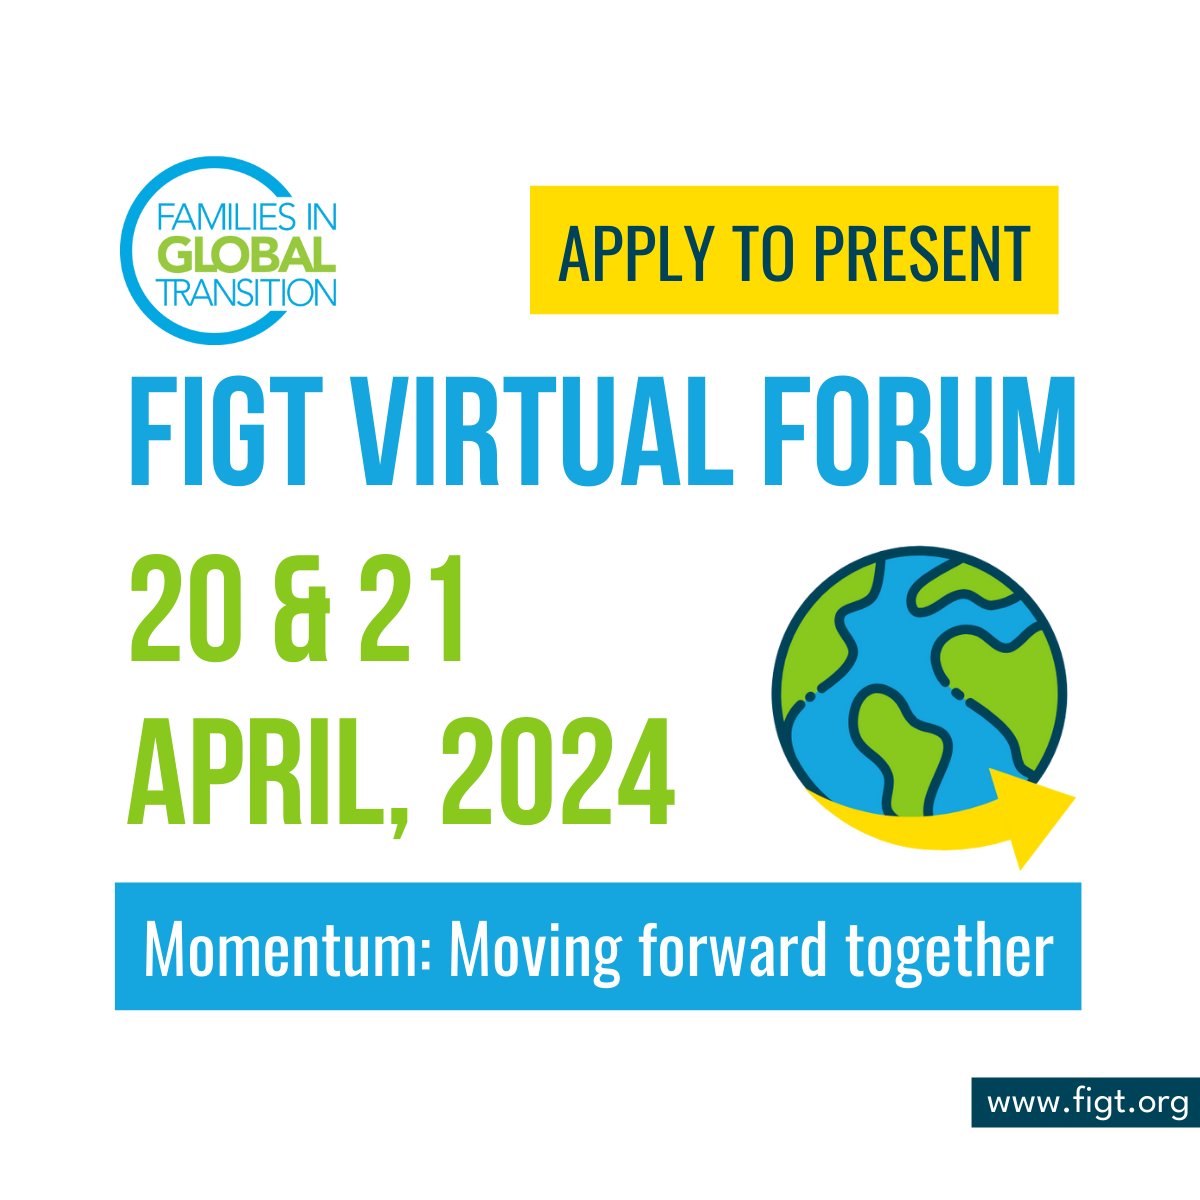 Weekends are usually a good time to put pen to paper. Have you applied to present at the 2024 #FIGT Forum? Don't miss your opportunity, applications close on 31 October. figt.org/Apply_to_prese…